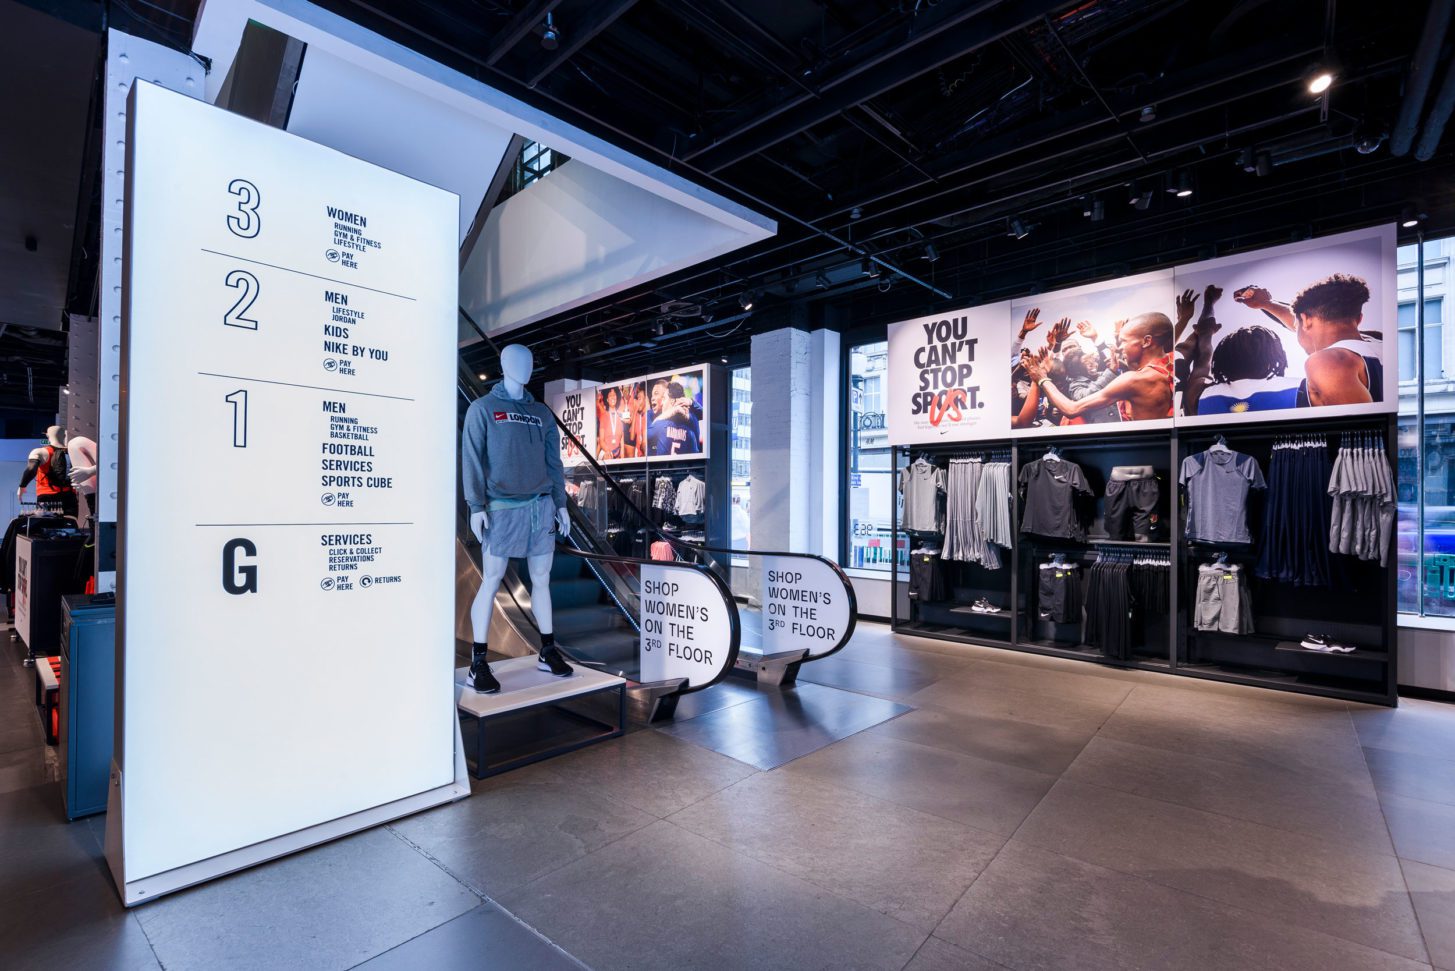 What You Can Expect From Nike's Pop-Up Shop